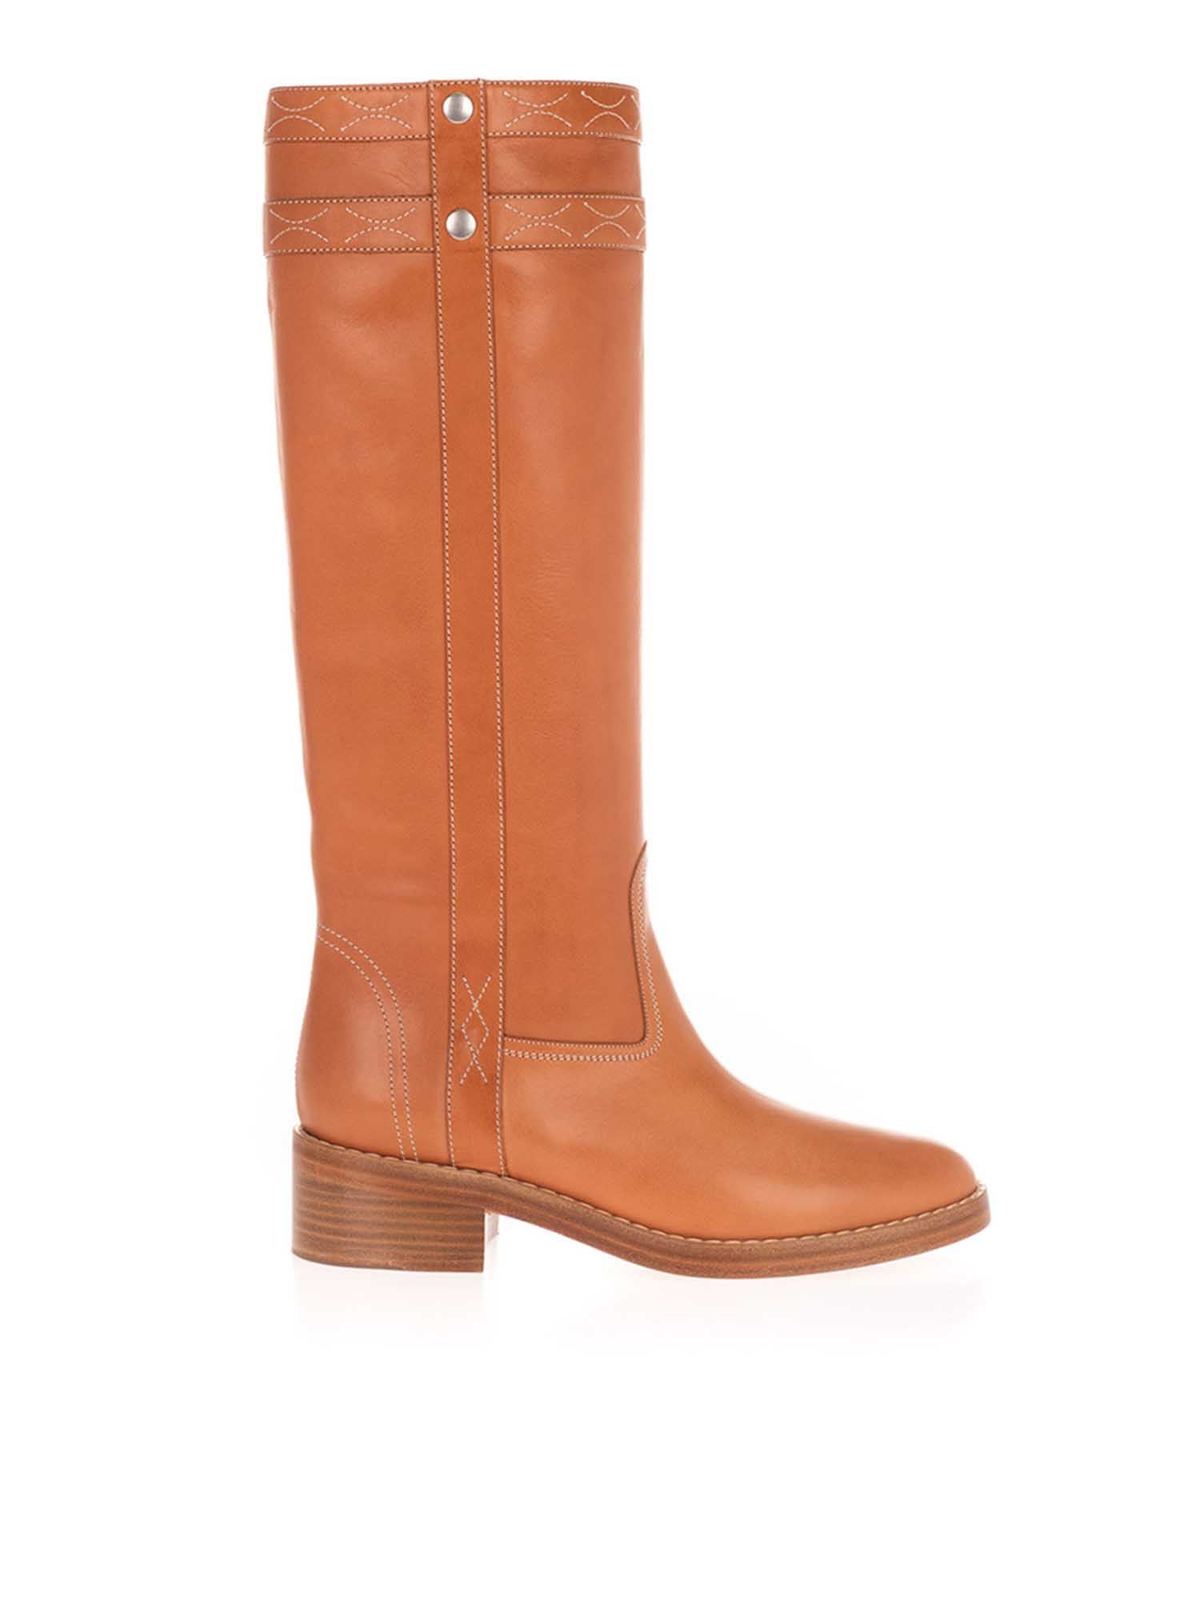 Celine LEATHER BOOTS IN CAMEL COLOR